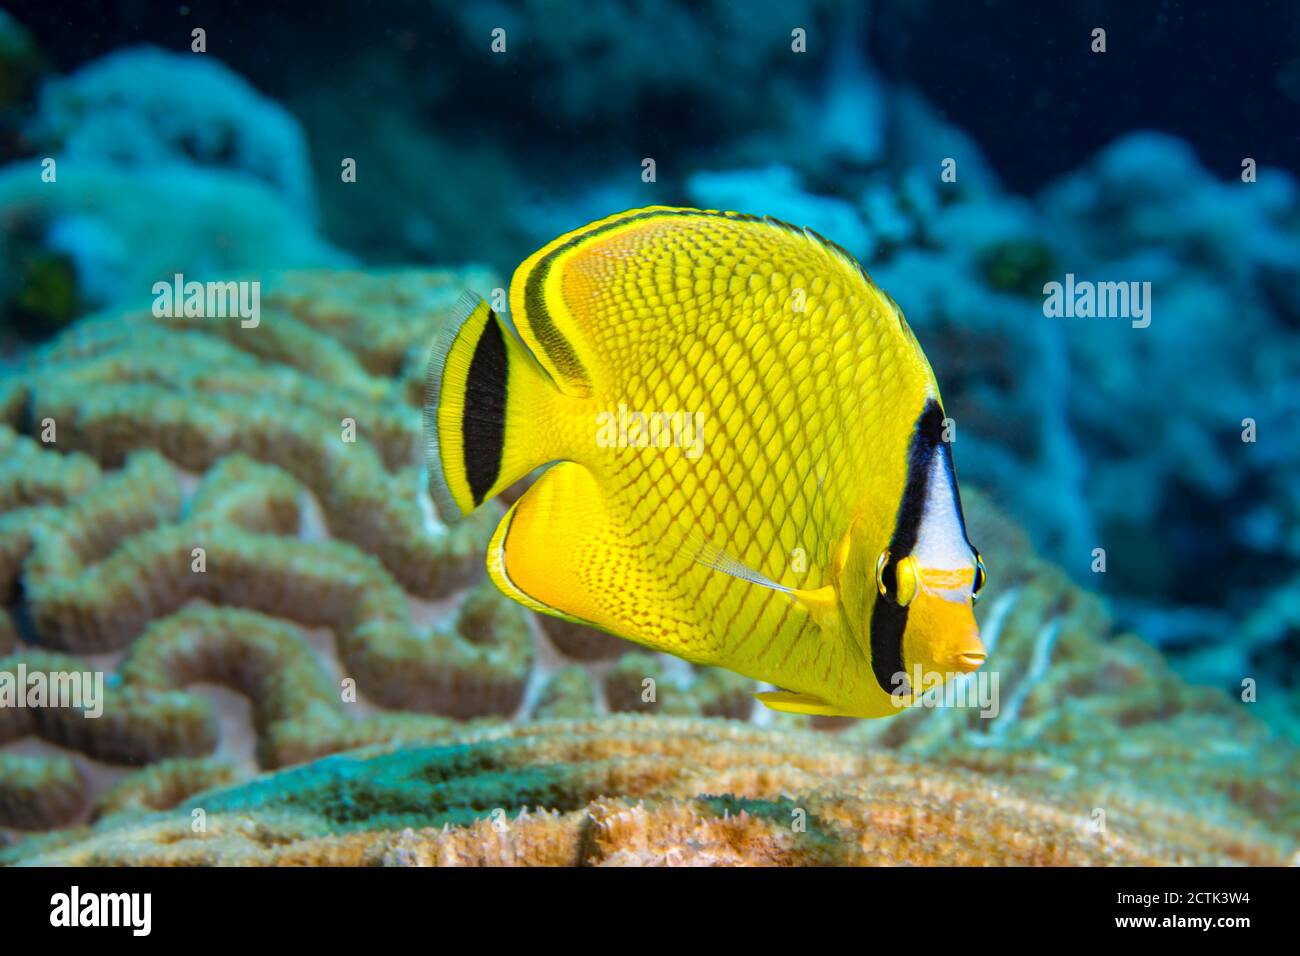 The latticed butterflyfish, Chaetodon rafflesi, feeds on sea anemones, polychaetes and coral polyps.  Yap, Federated States of Micronesia. Stock Photo